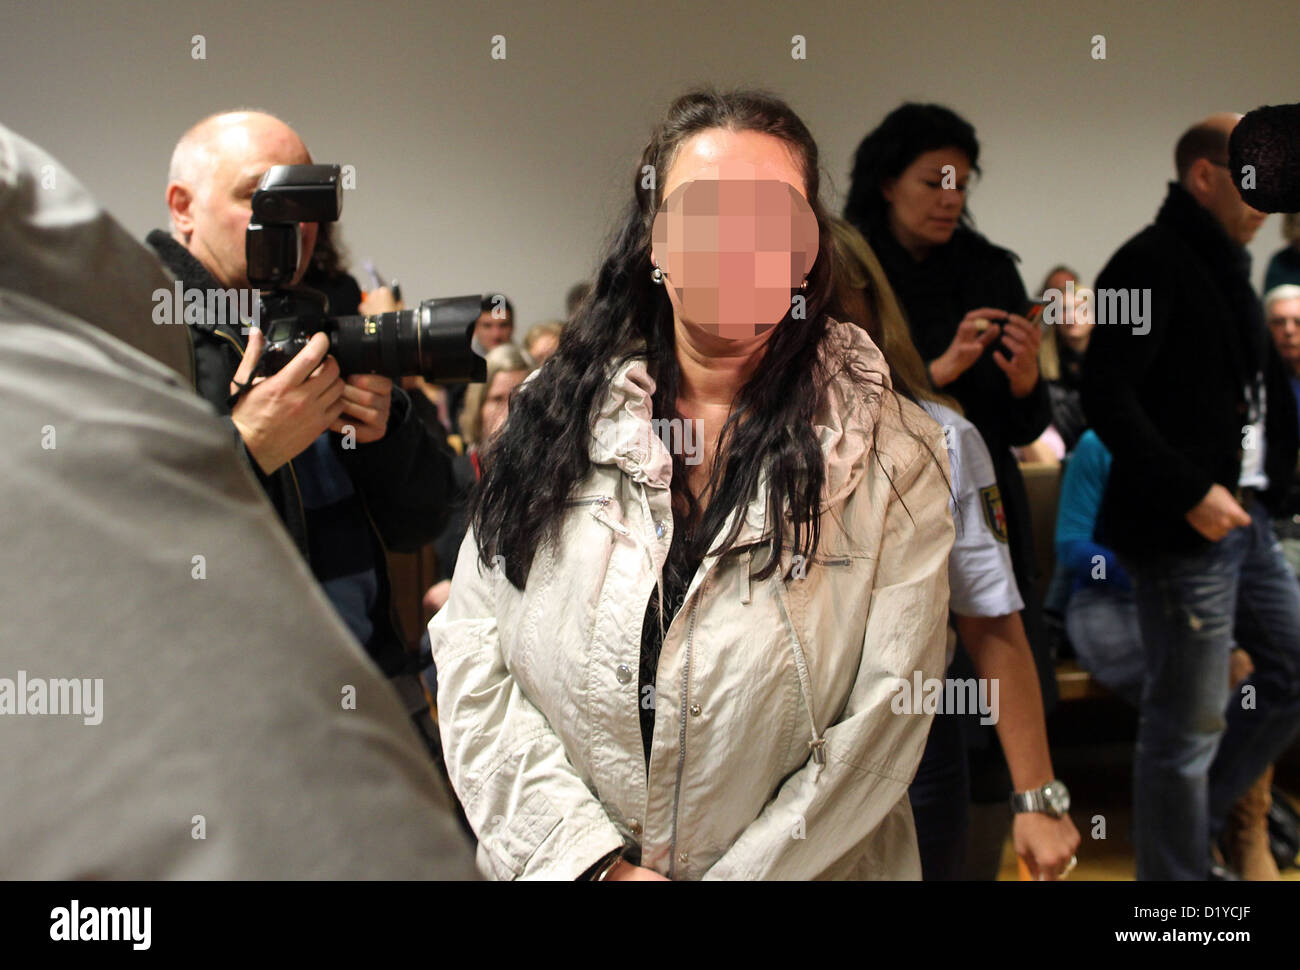 The defendant Melanie-Christin M. B. enters the County Court of Koblenz, Germany, 8 January 2013. She and her partner are being accused to have taken the baby Michaela out of her stroller in front of the mother in Ústí nad Labem, Czech Republic, 4 July 2012. For days any tracks of the infant were missing until she was found in good conditions in an apartment in Koblenz, Germany. Photo: Thomas Frey Stock Photo